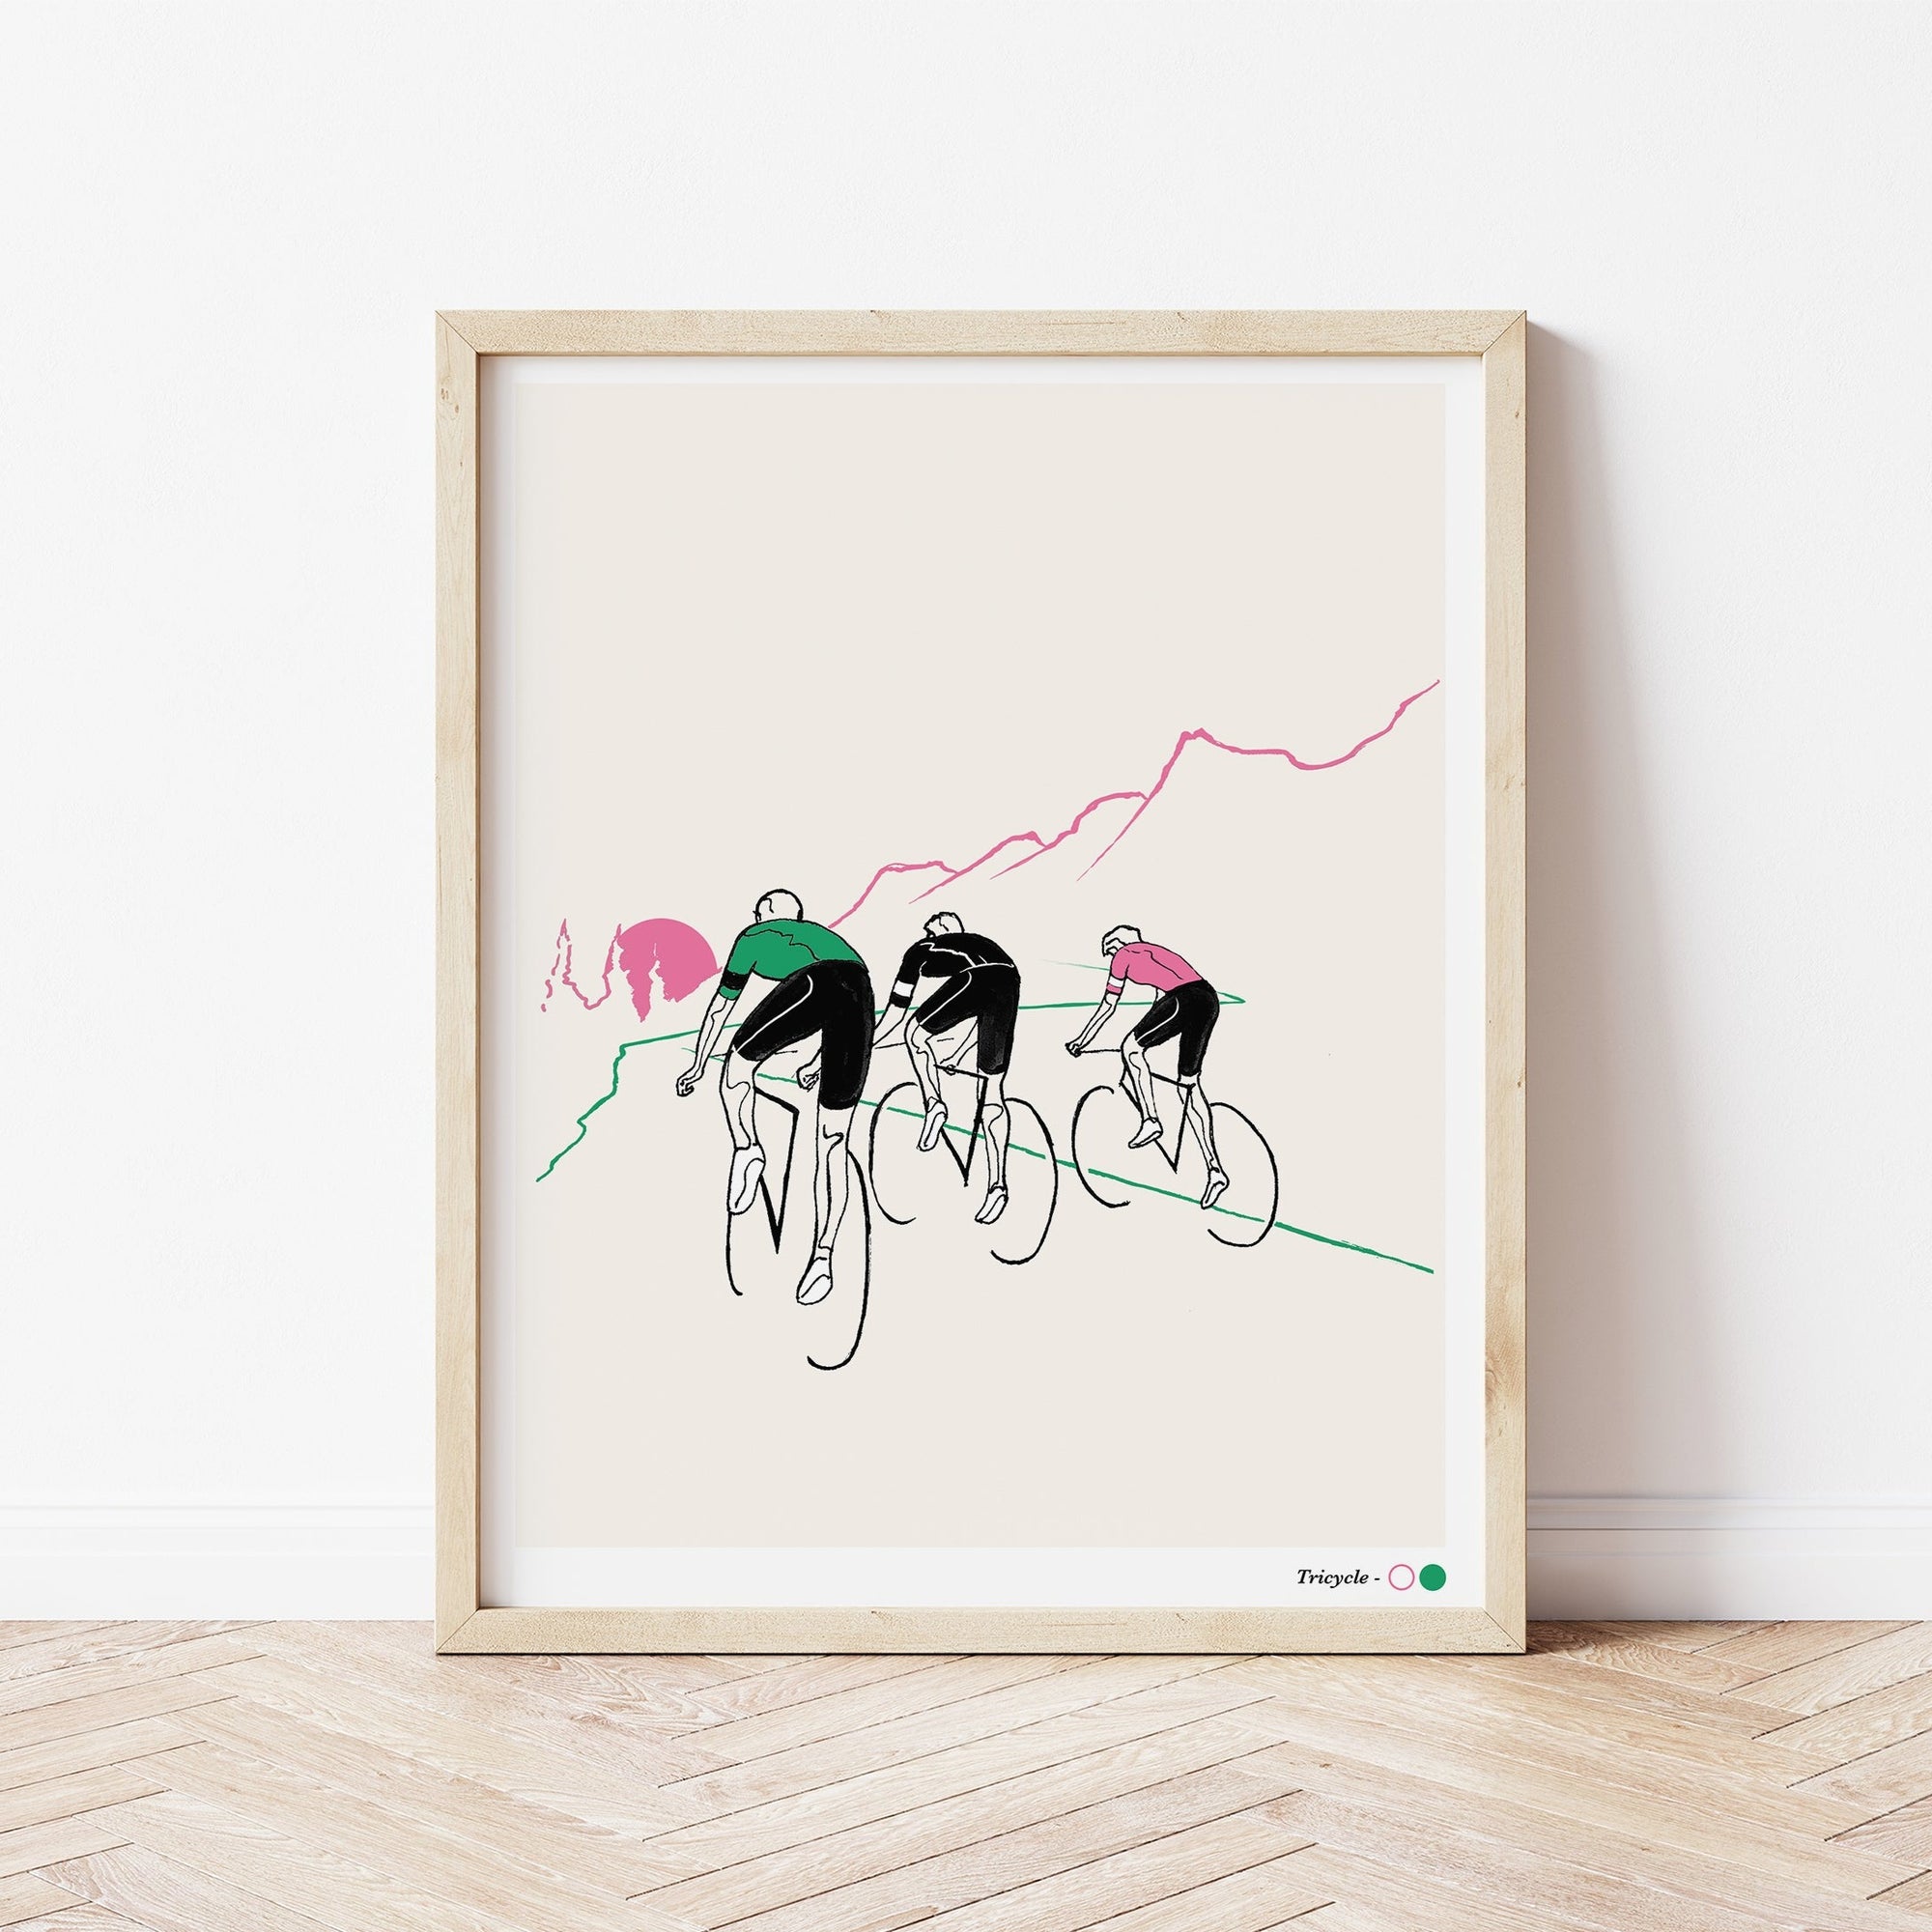 Tricycle Print by Ovso